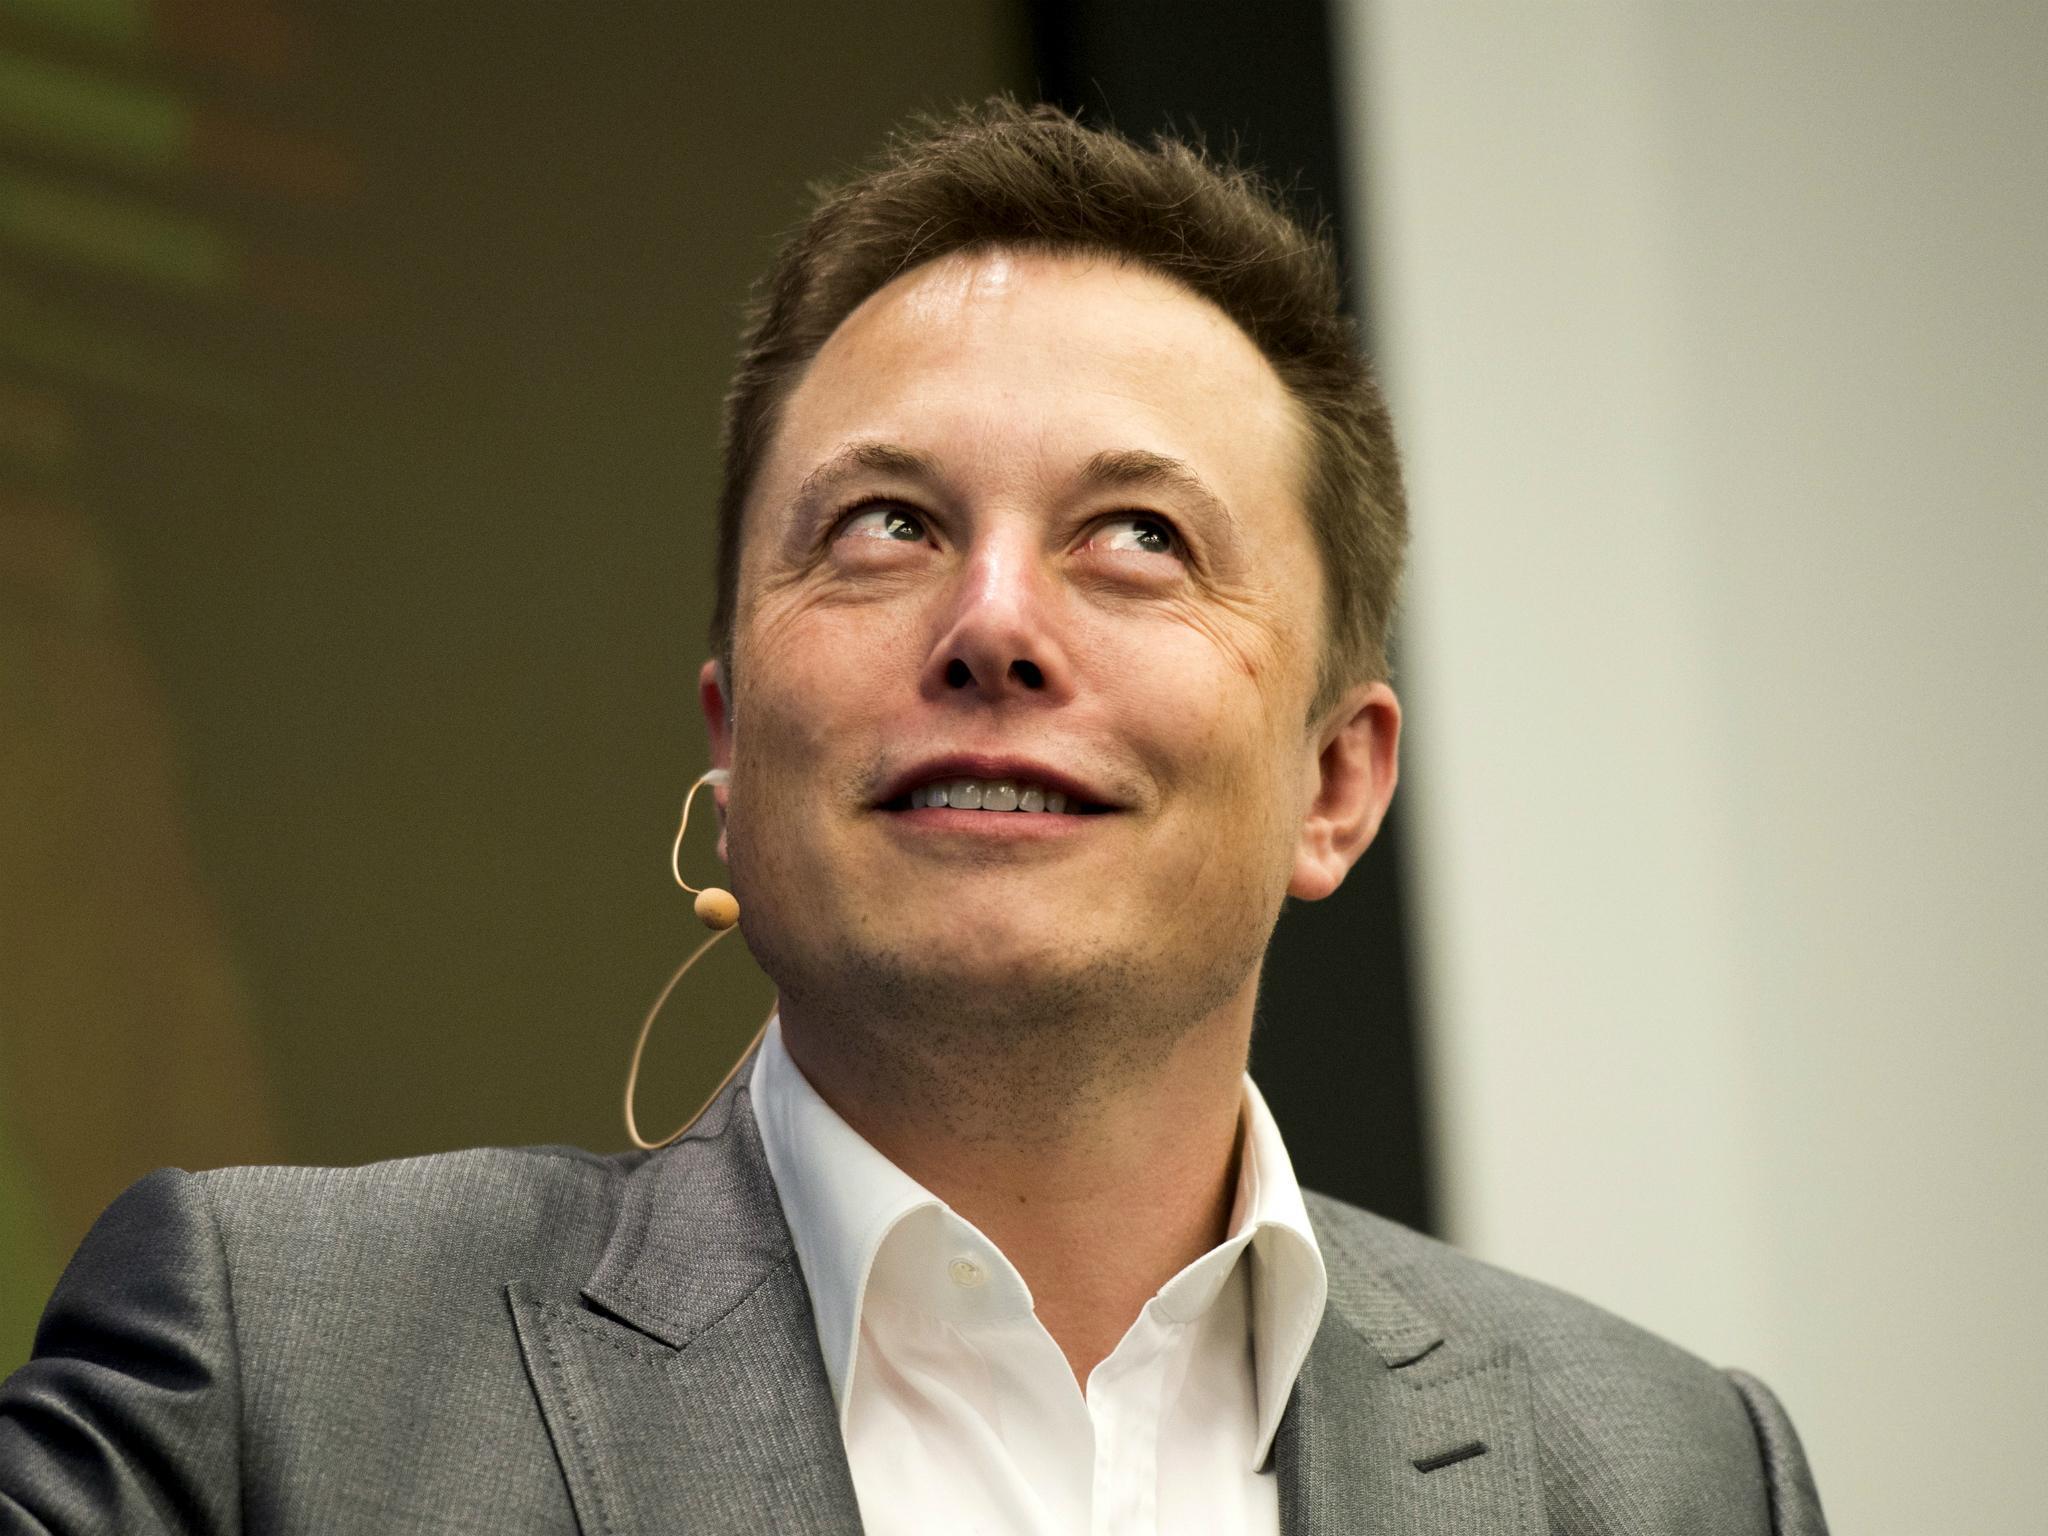 Some shareholders opposed such a generous package for Tesla’s chief executive